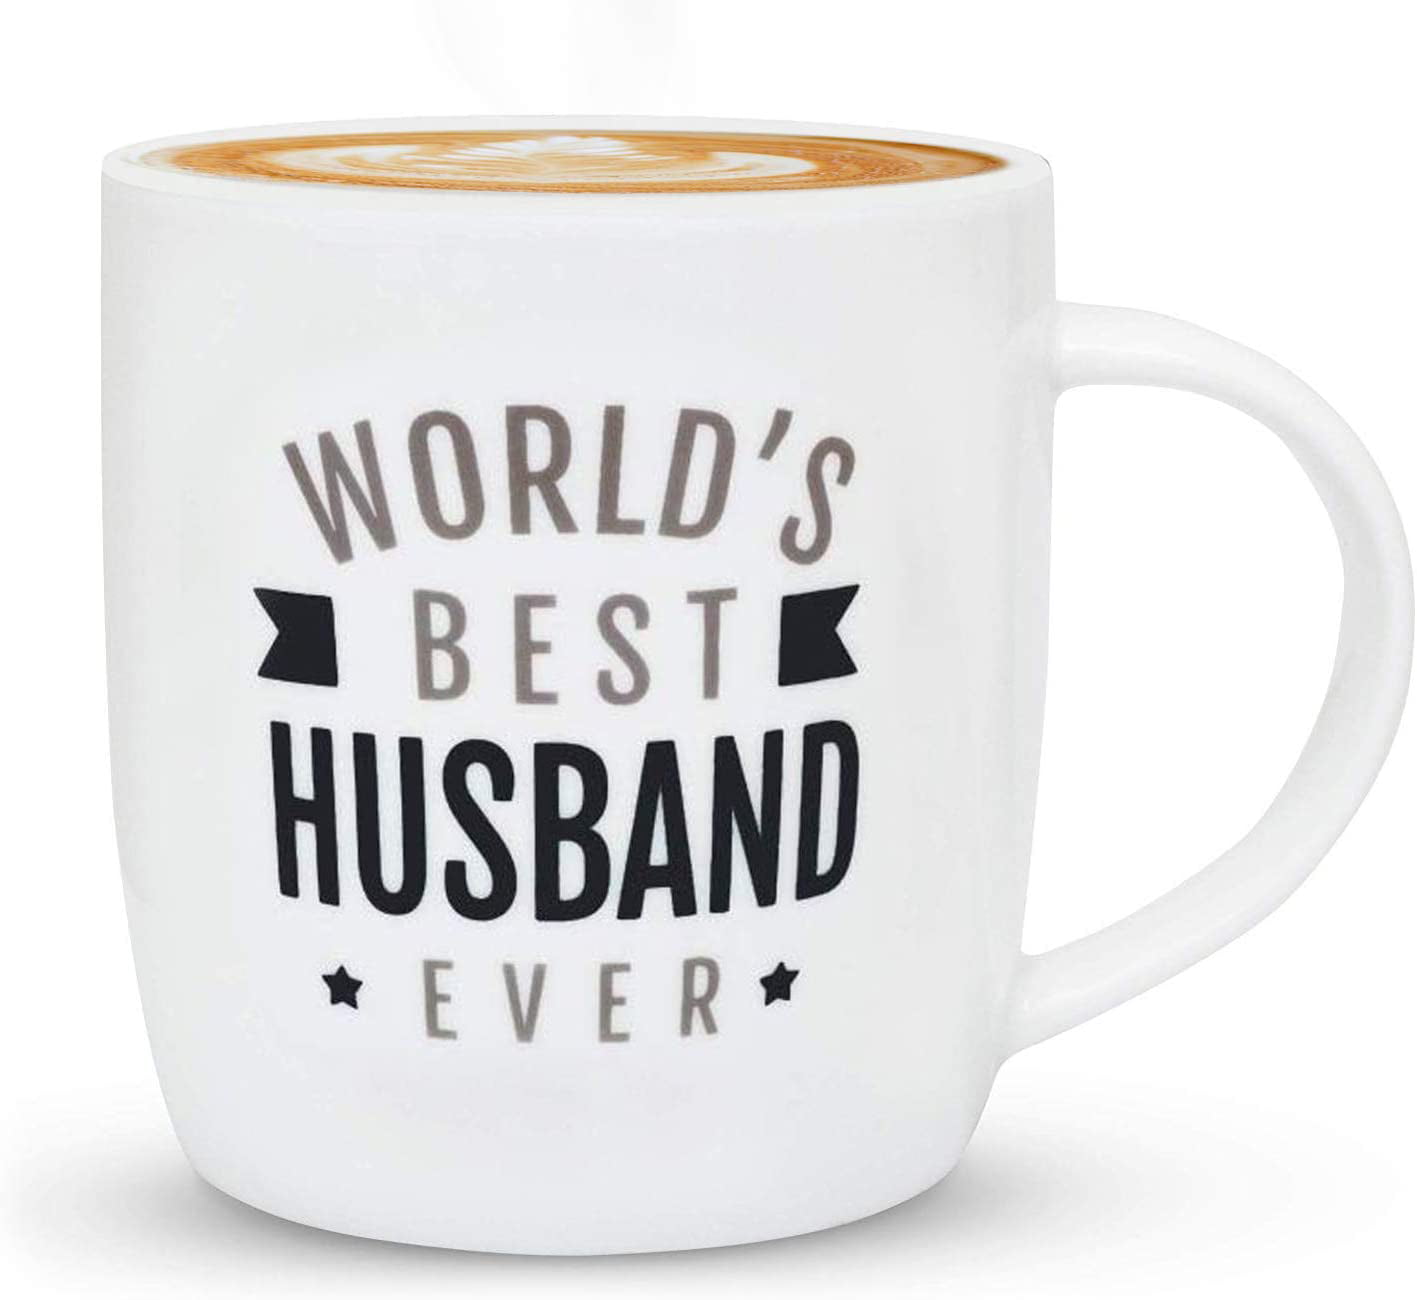 Funny gifts for husband